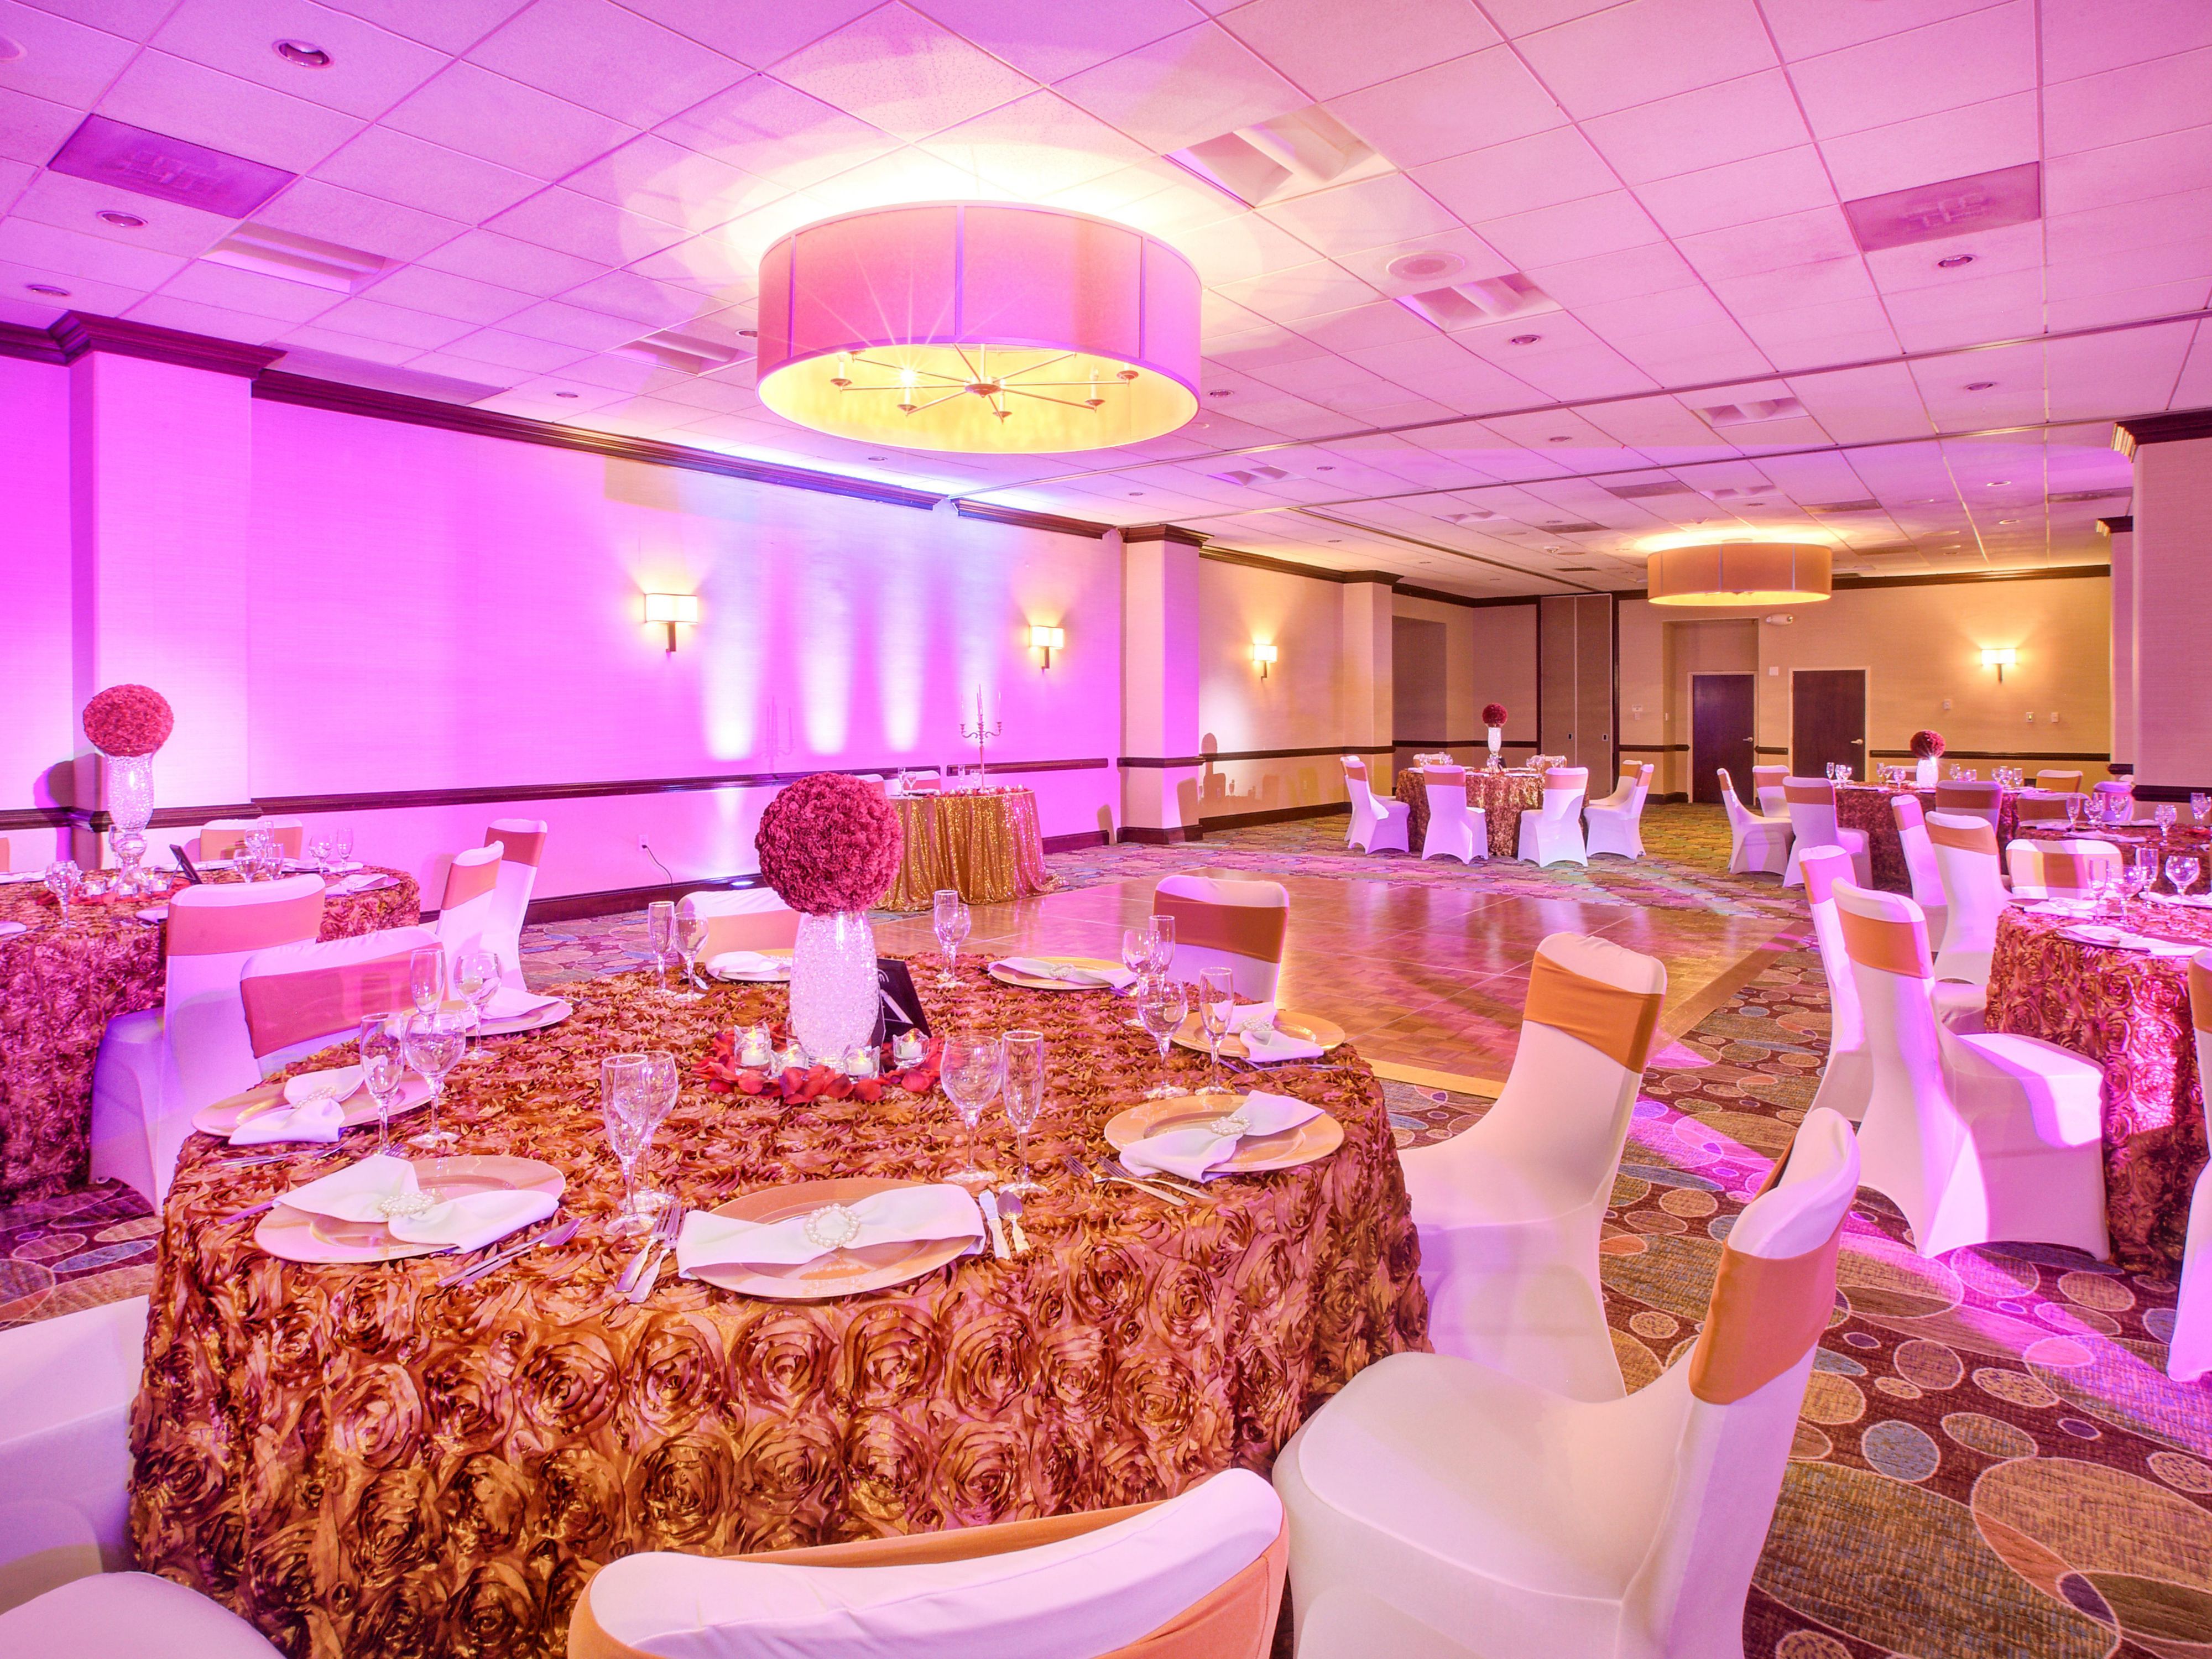 Celebrate life's most momentous occasions at the Holiday Inn National Airport. Whether you're planning a wedding, a milestone birthday, a family or military reunion, our first-class catering team will walk you through every detail of your special day. Our ideal location allows you to host up to 200 people, just minutes away from Washington, DC. 